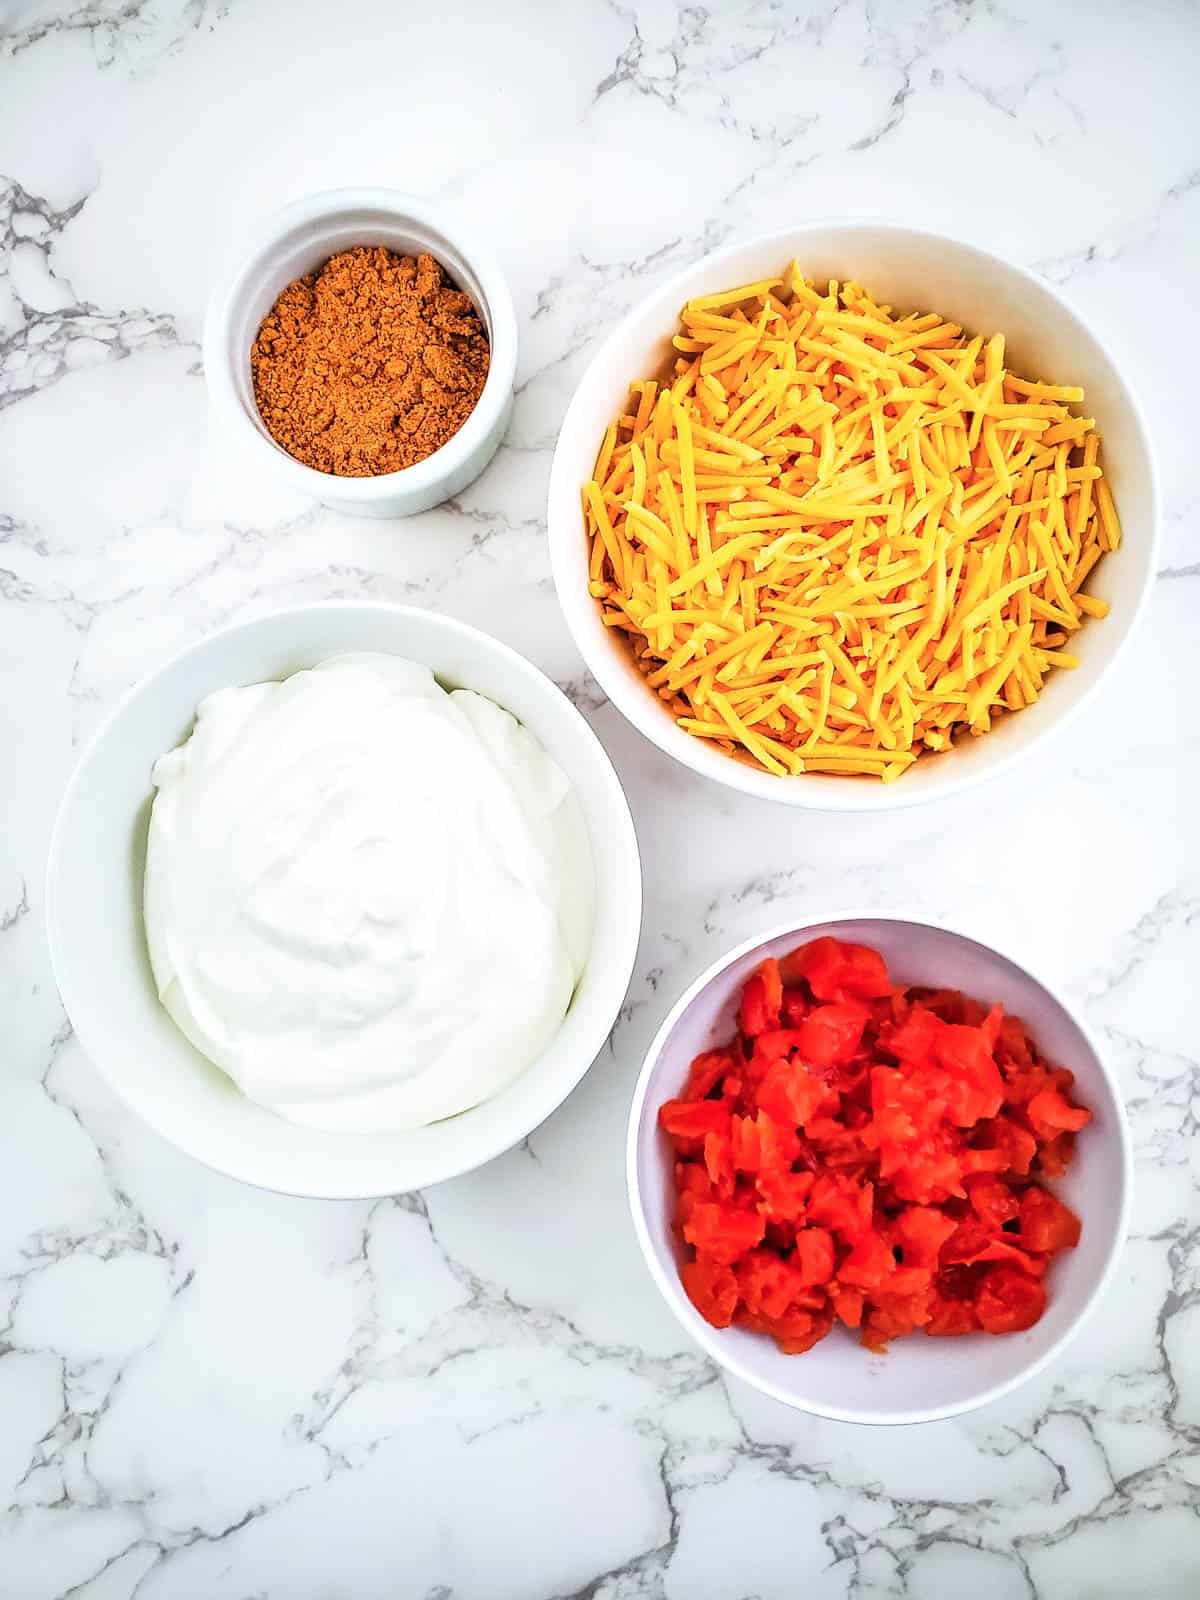 Ingredients for rotel taco dip includes cheddar cheese, rotel with red chiles, sour cream, and taco seasoning.